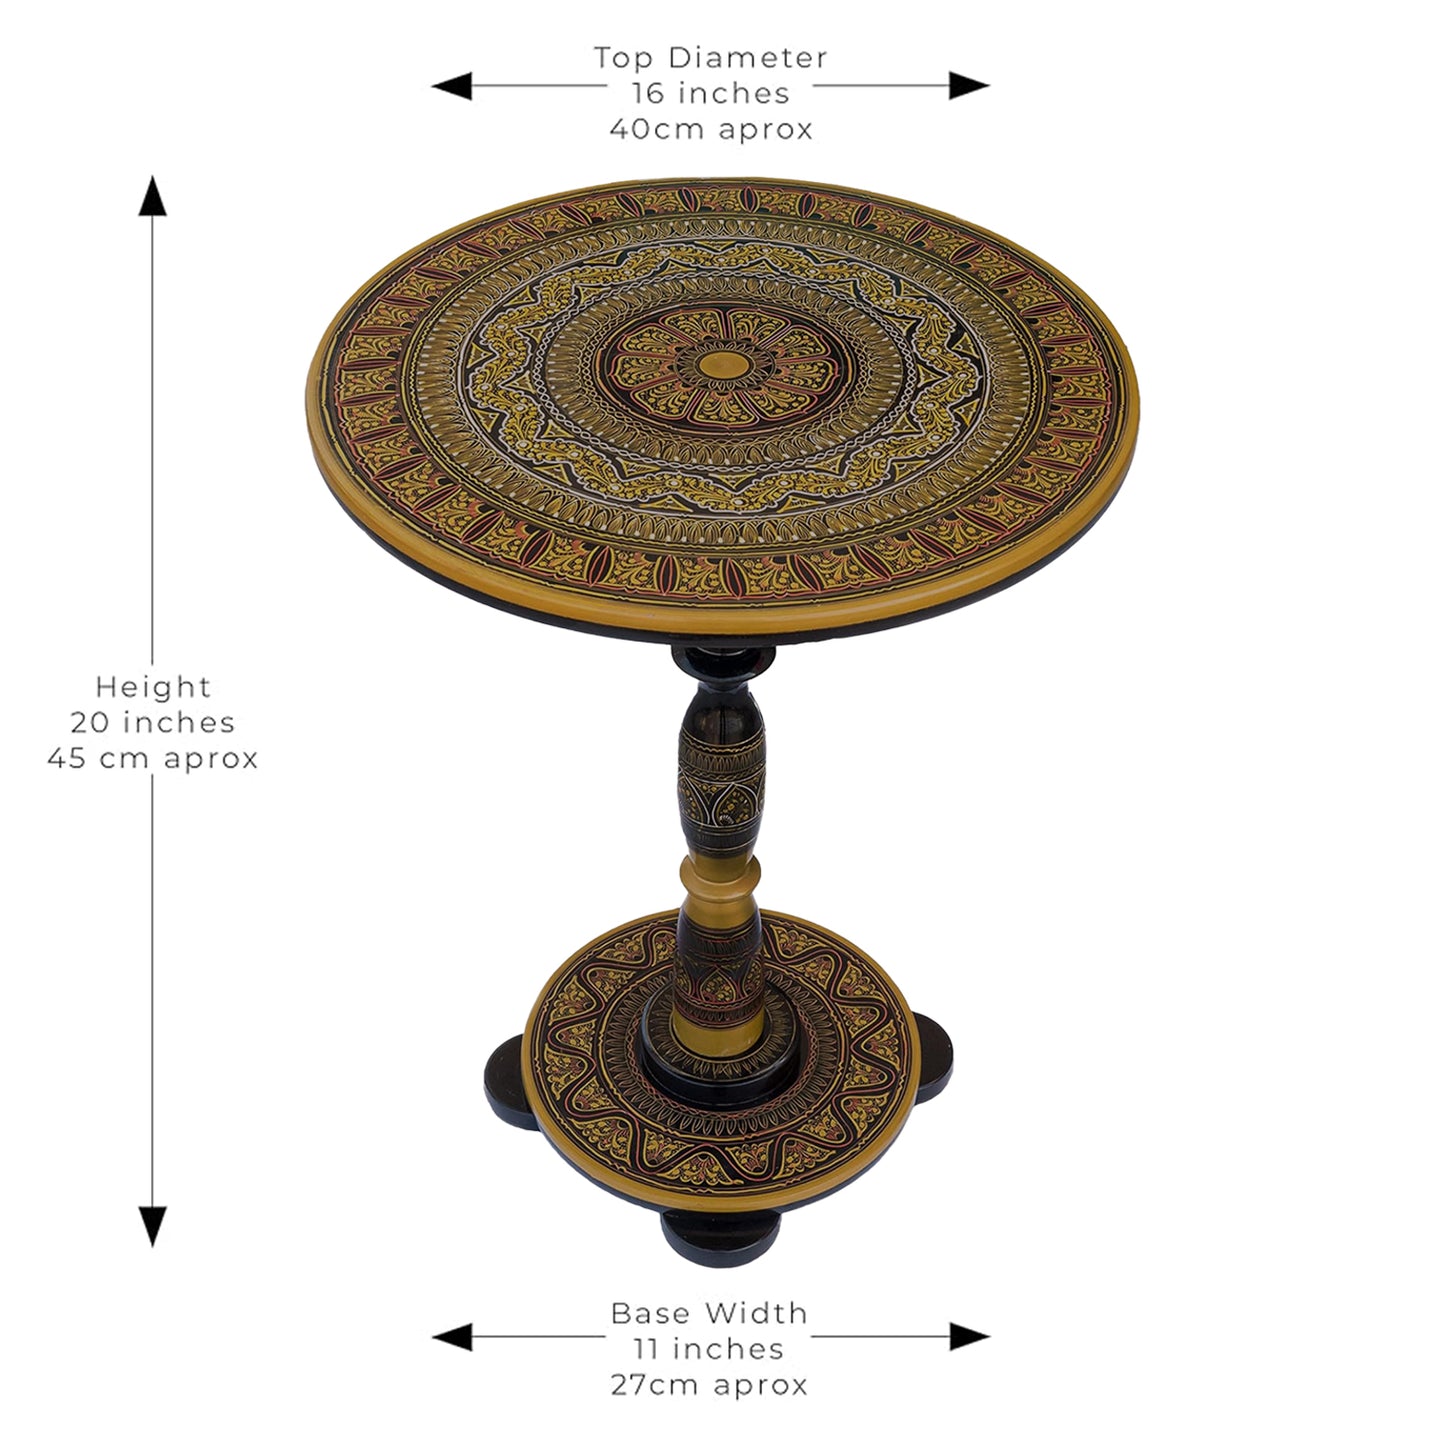 Multan Inspired Hand Carved Lacquer Art Table By Ushaz